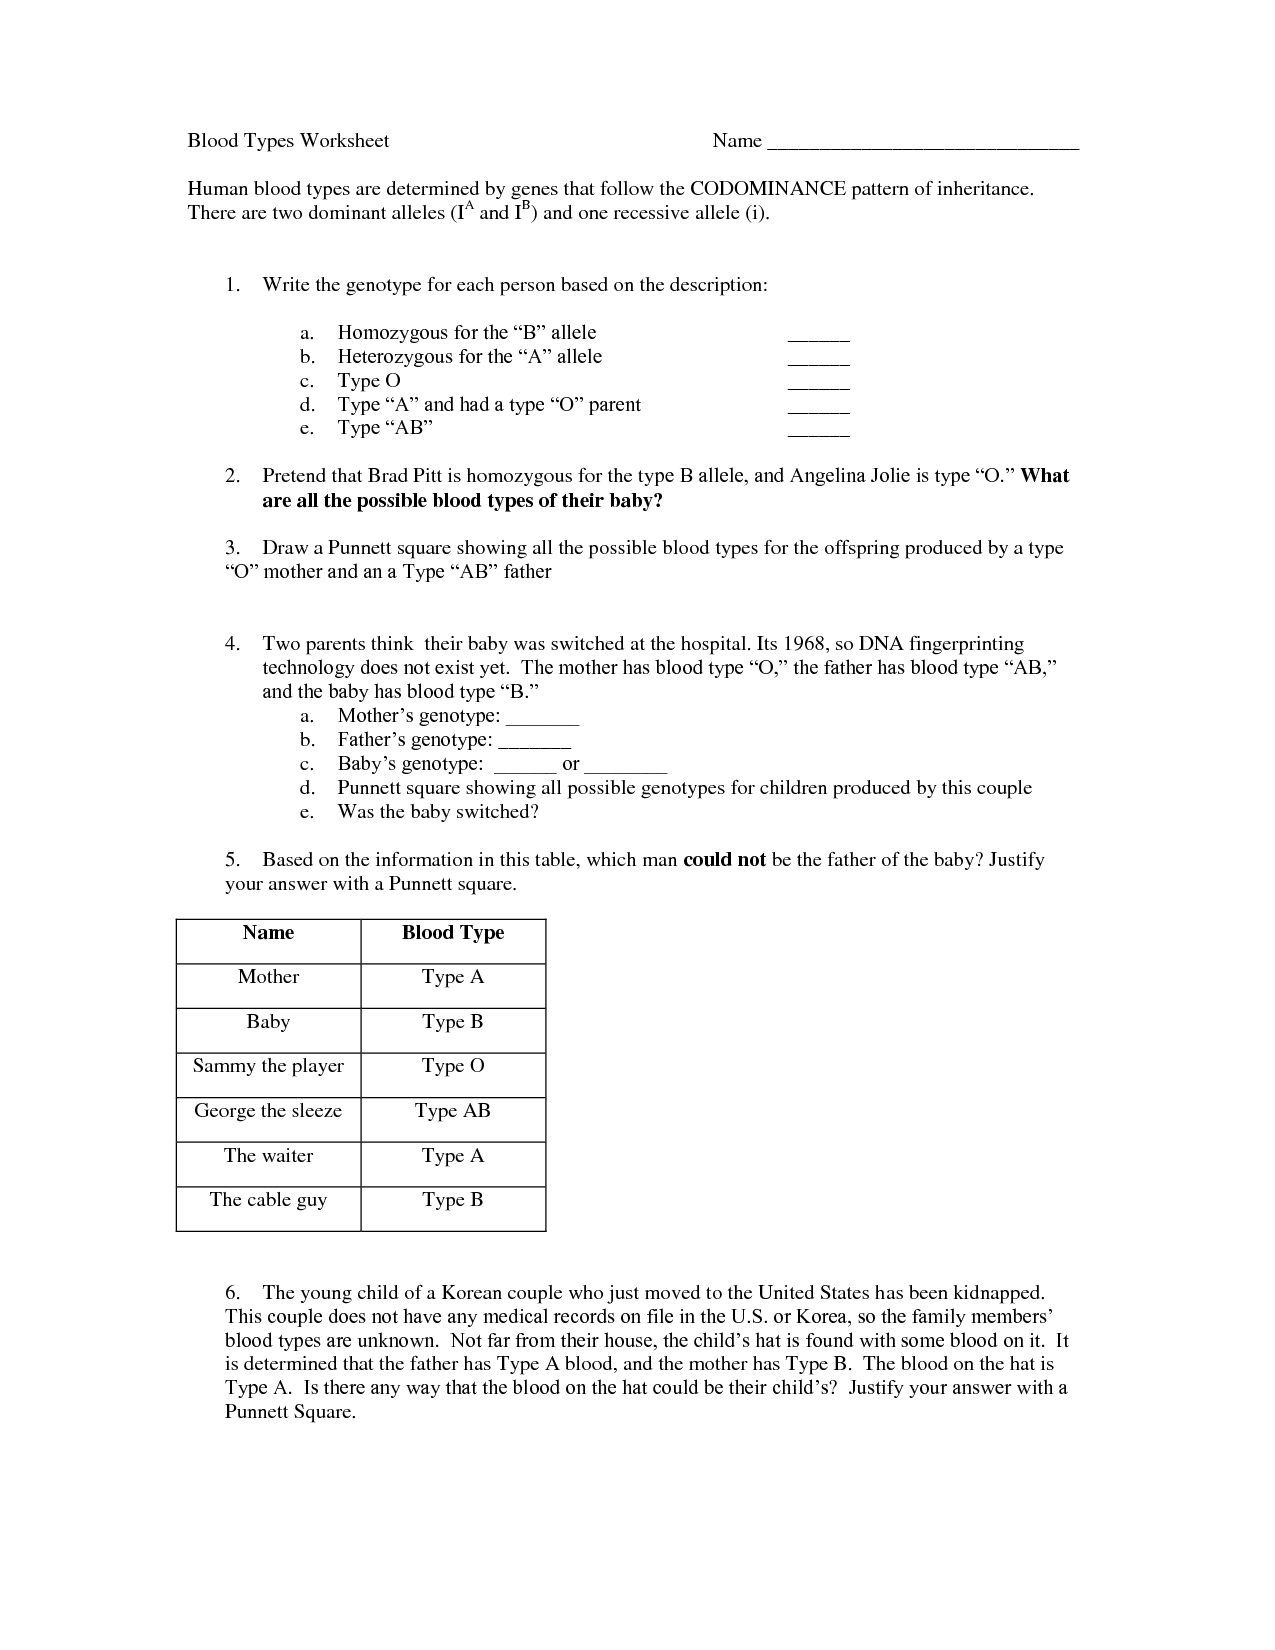 Blood Types Worksheet Answers